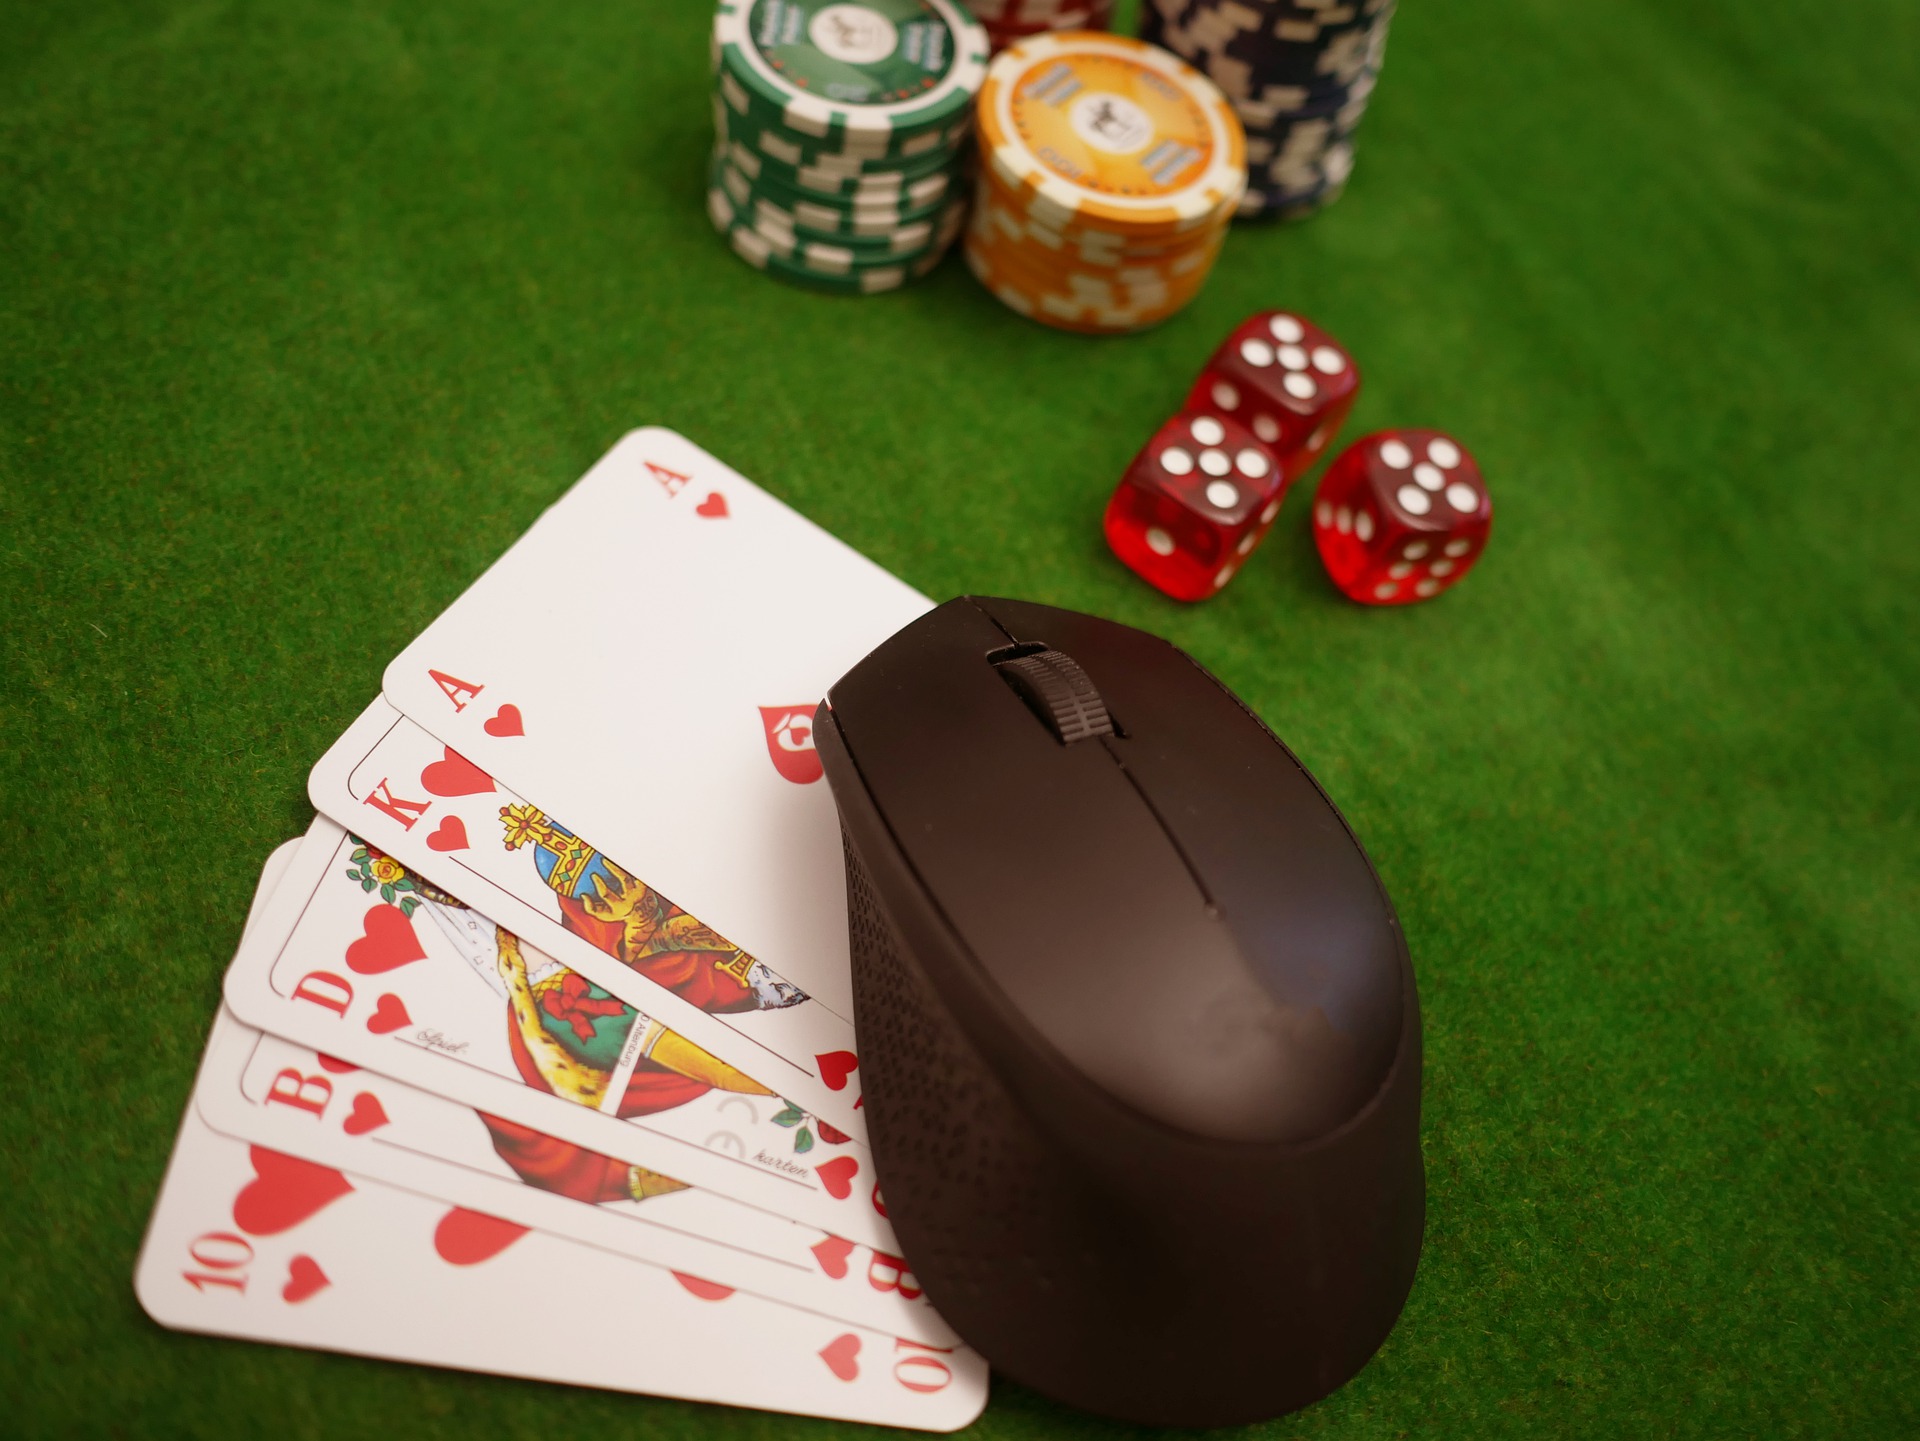 50 Reasons to secure online casinos in 2021